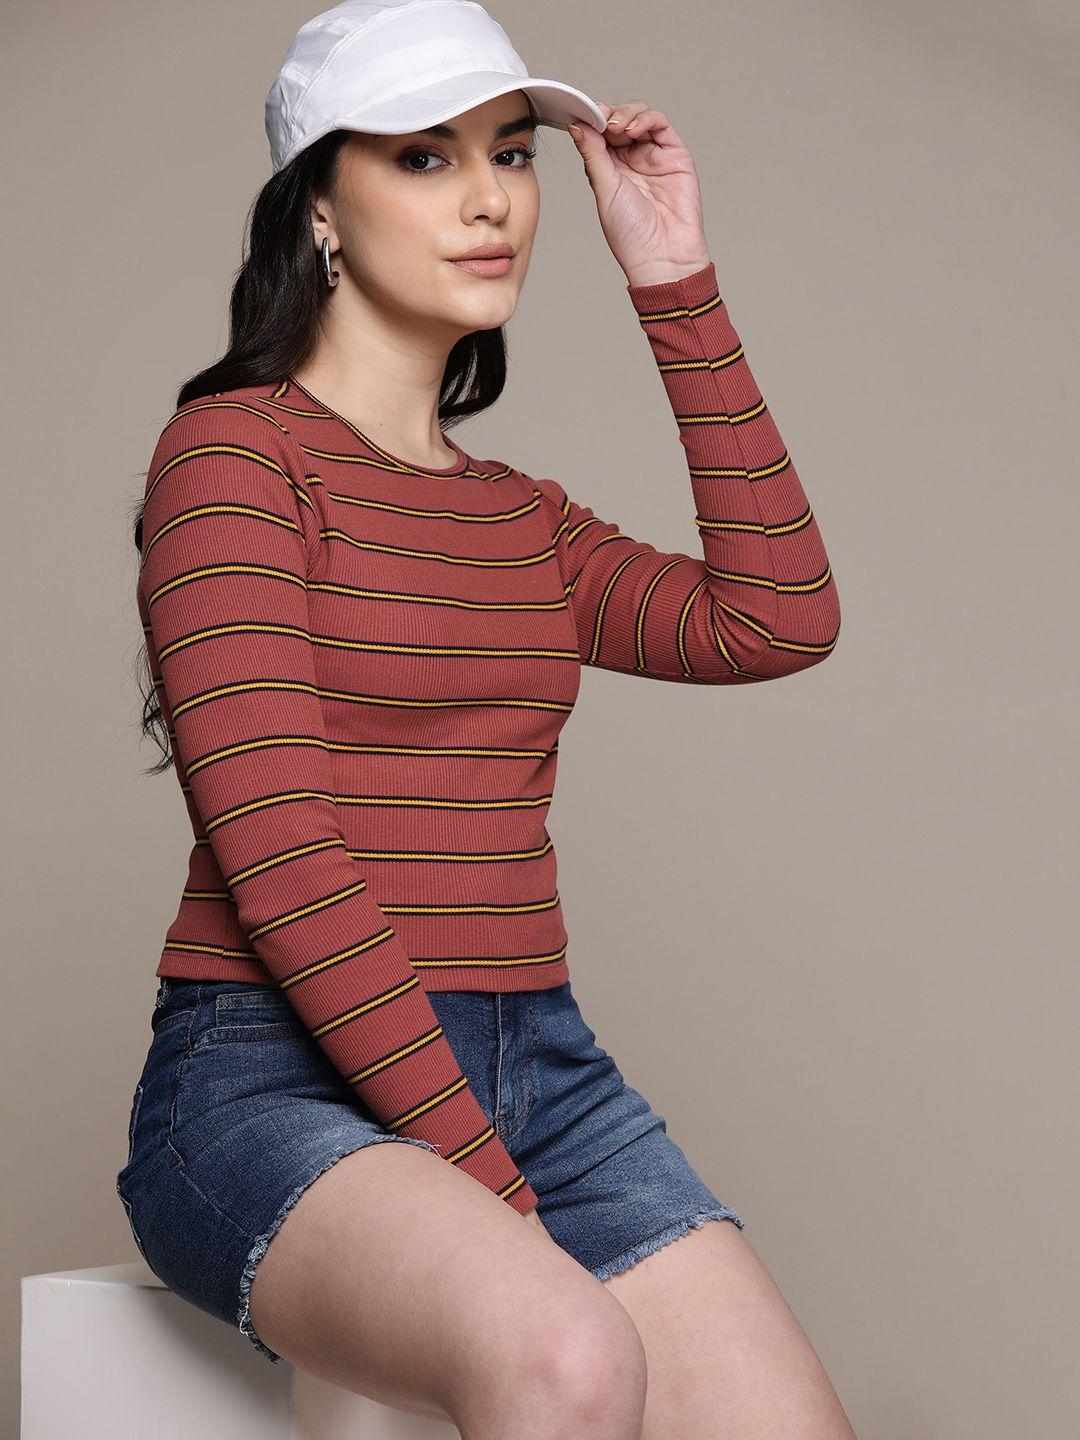 the-roadster-lifestyle-co.-striped-long-sleeve-knit-top